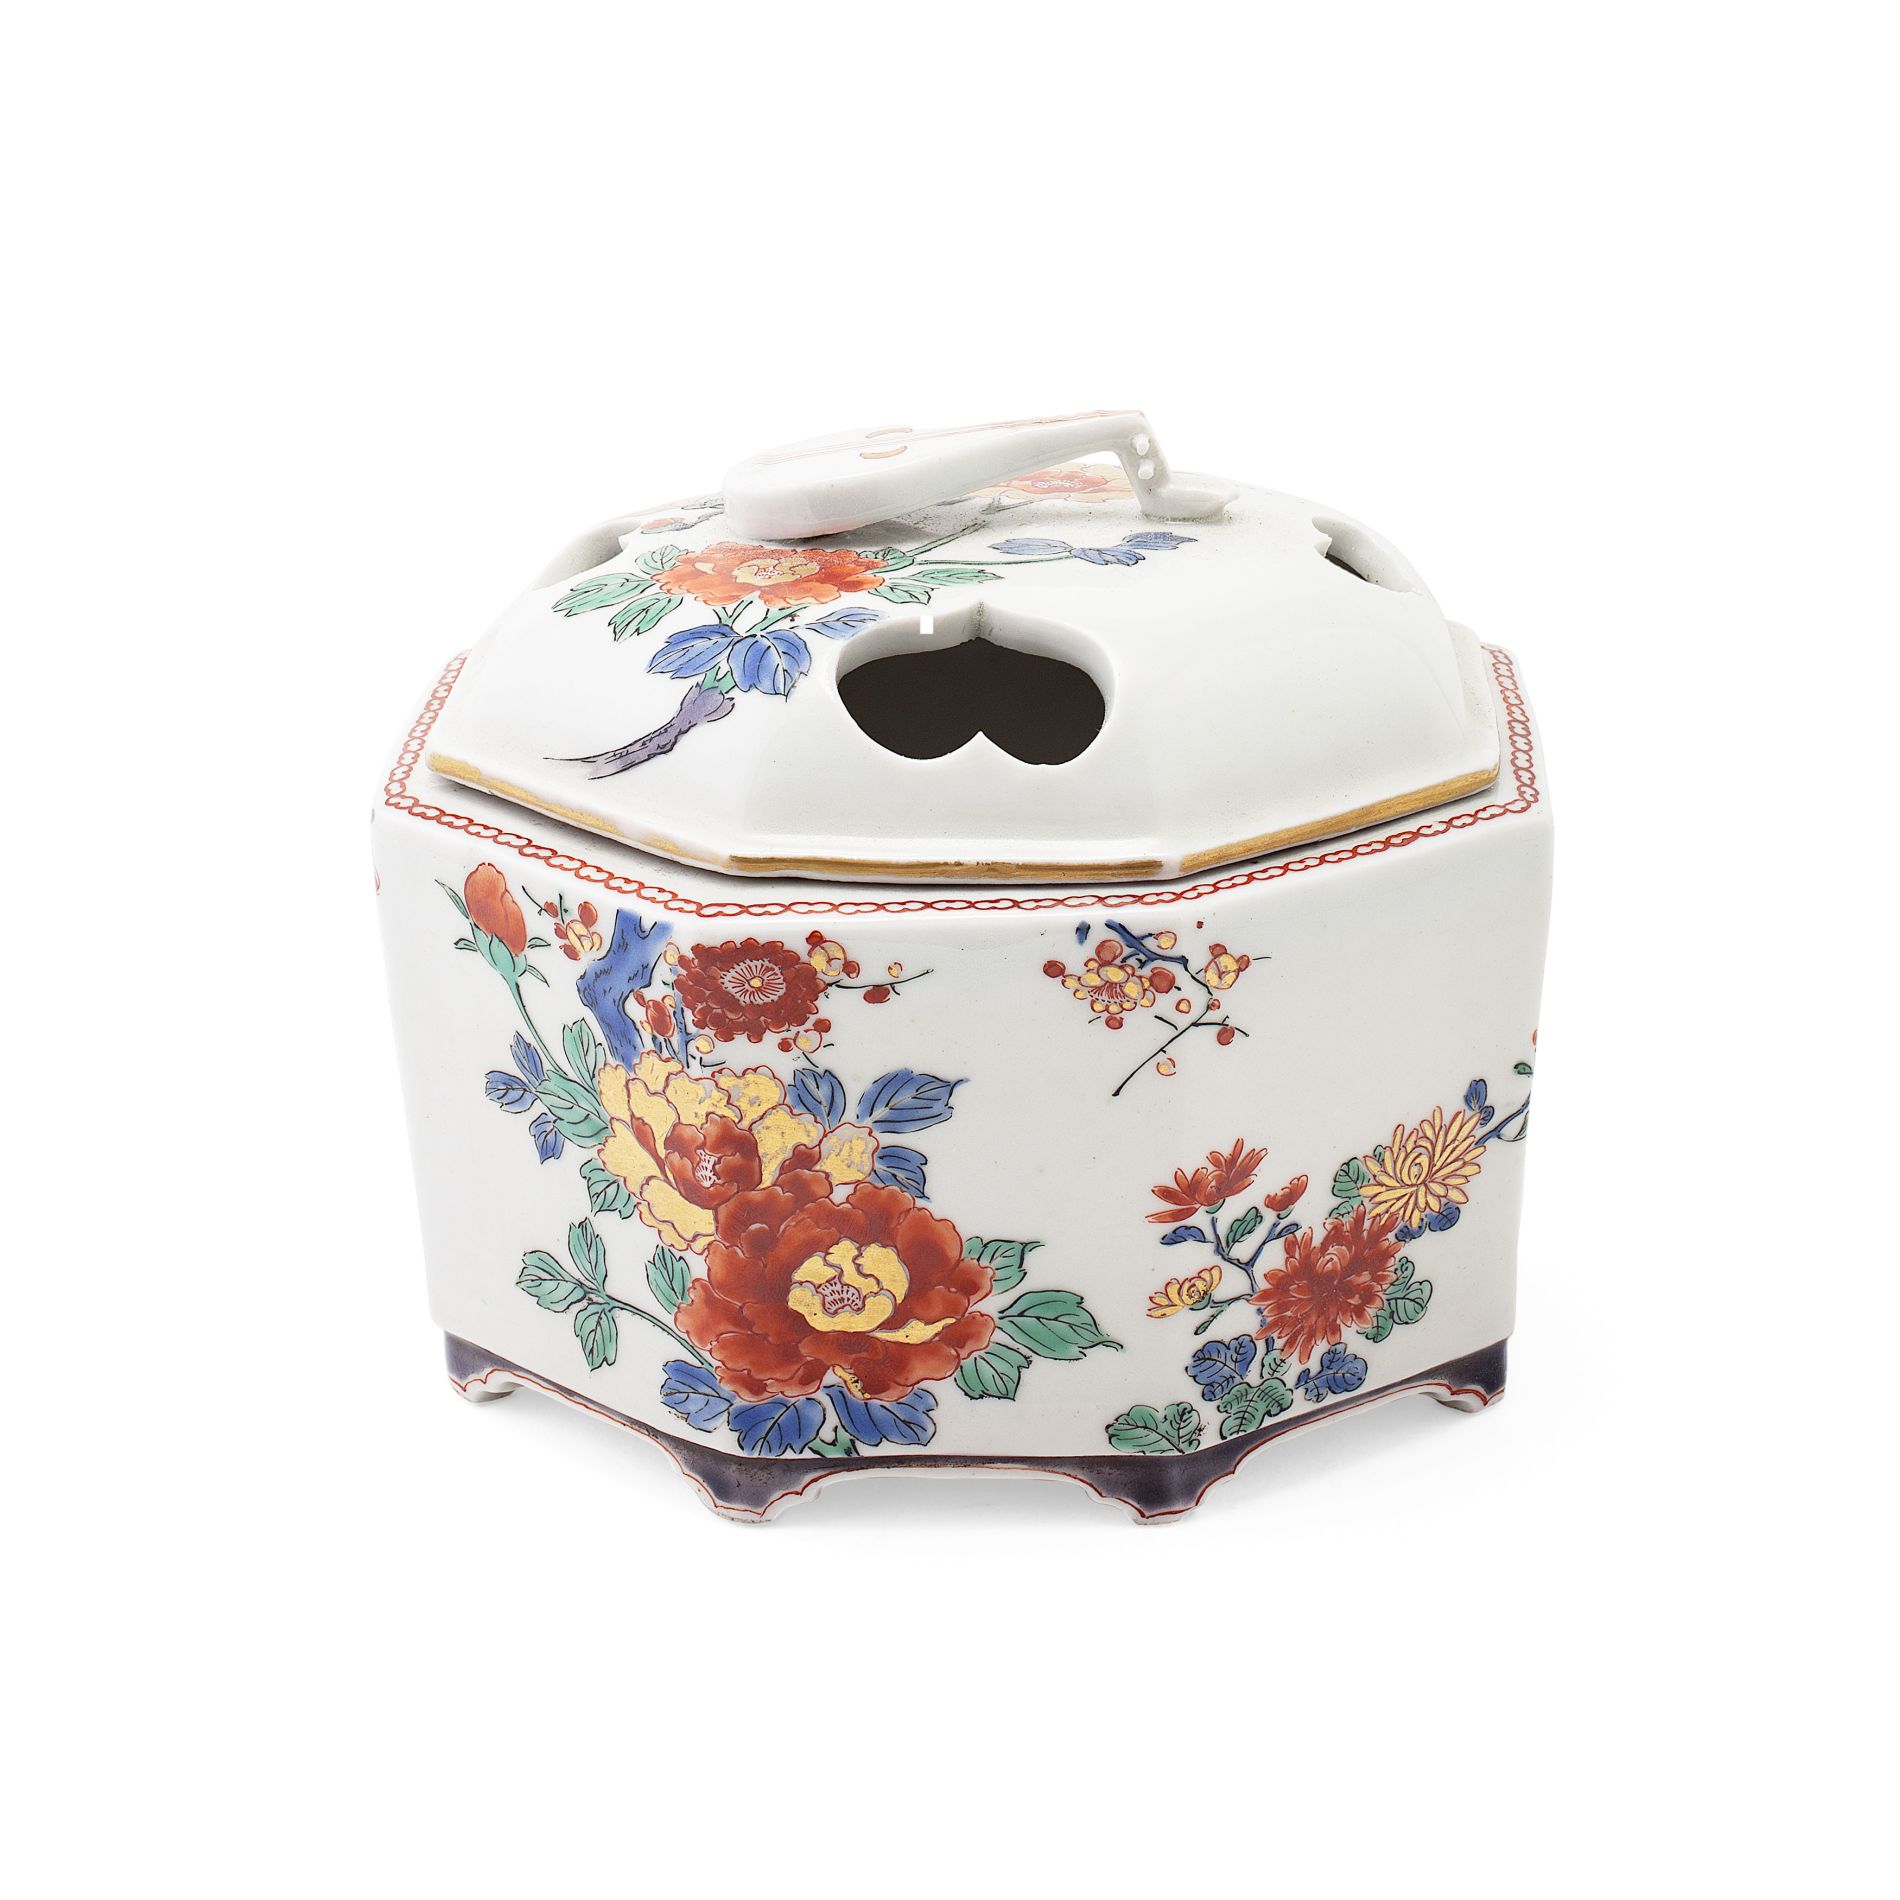 KAKIEMON STYLE OCTAGONAL COVERED POTPOURRI DISH 19TH CENTURY decorated in the typical palette with